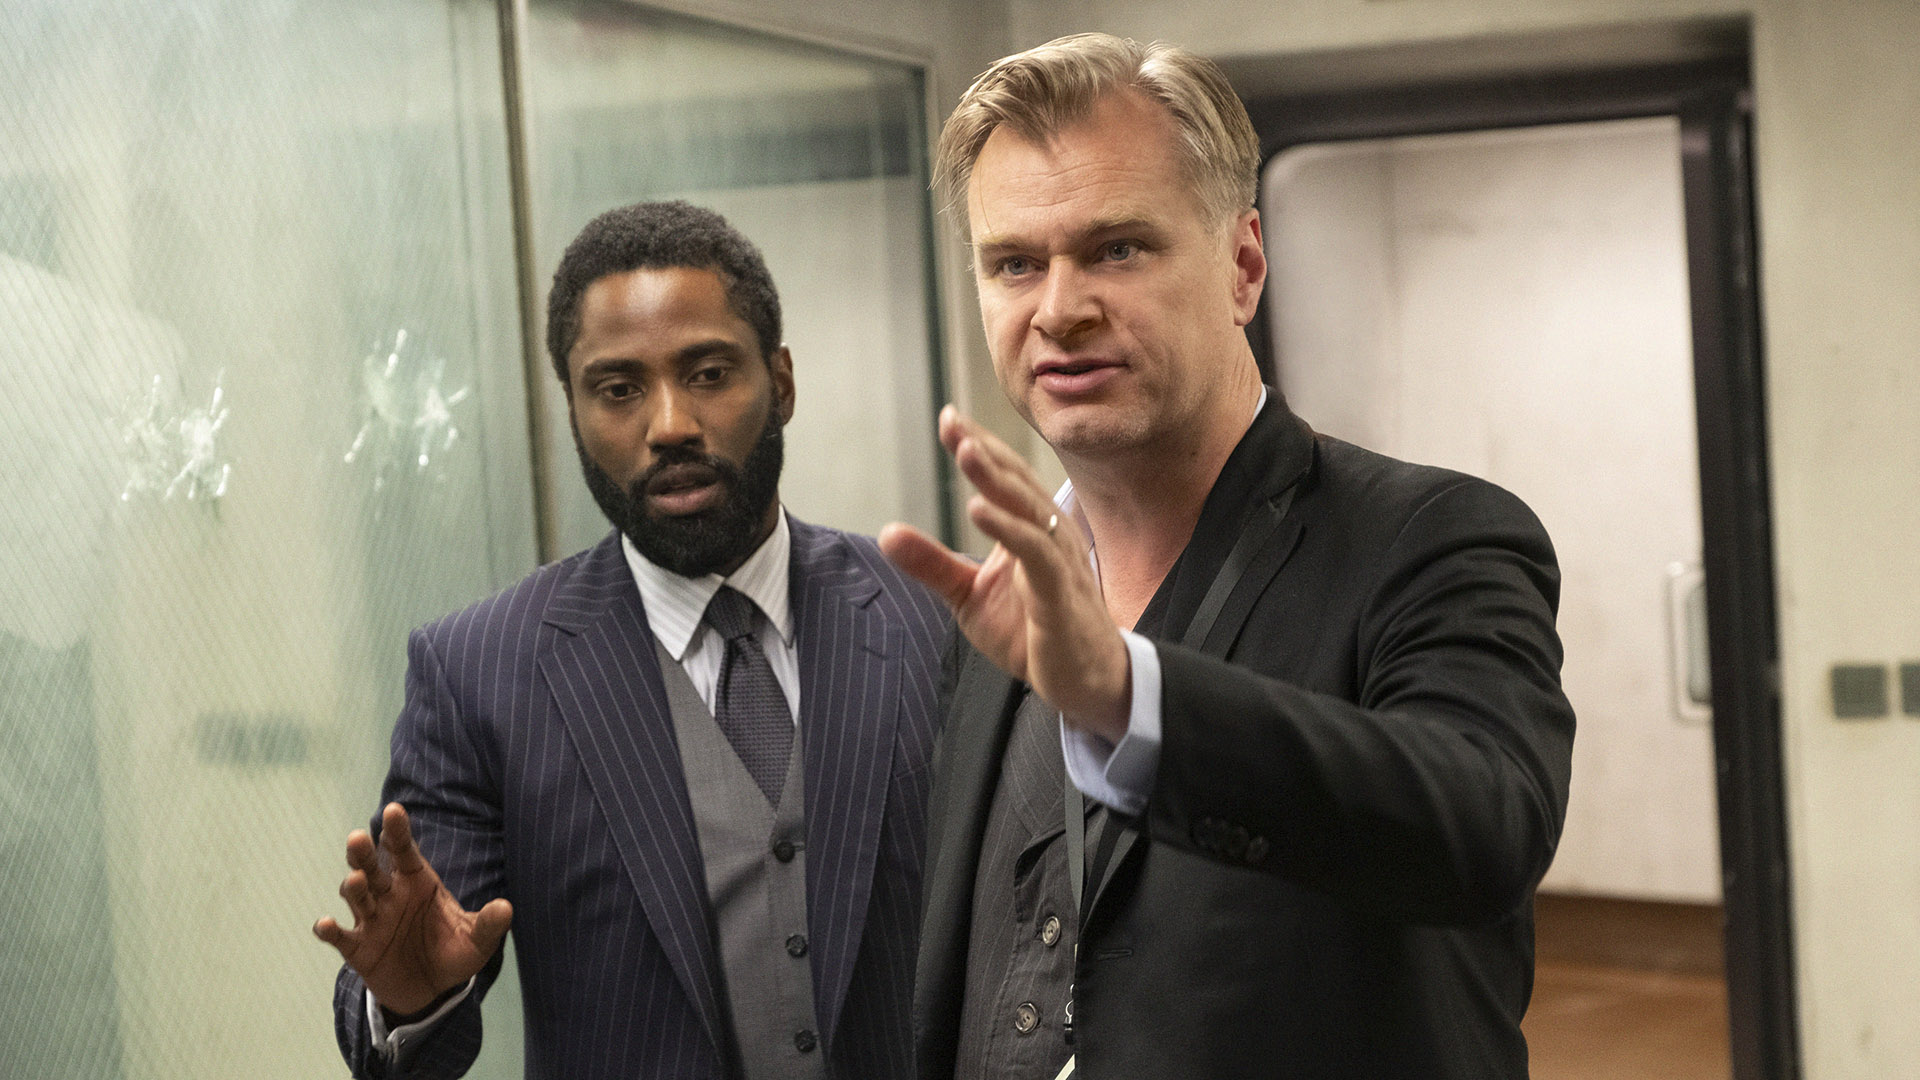 Ever Wonder How Hollywood Economy Works? Here's a Crash Course from Christopher Nolan